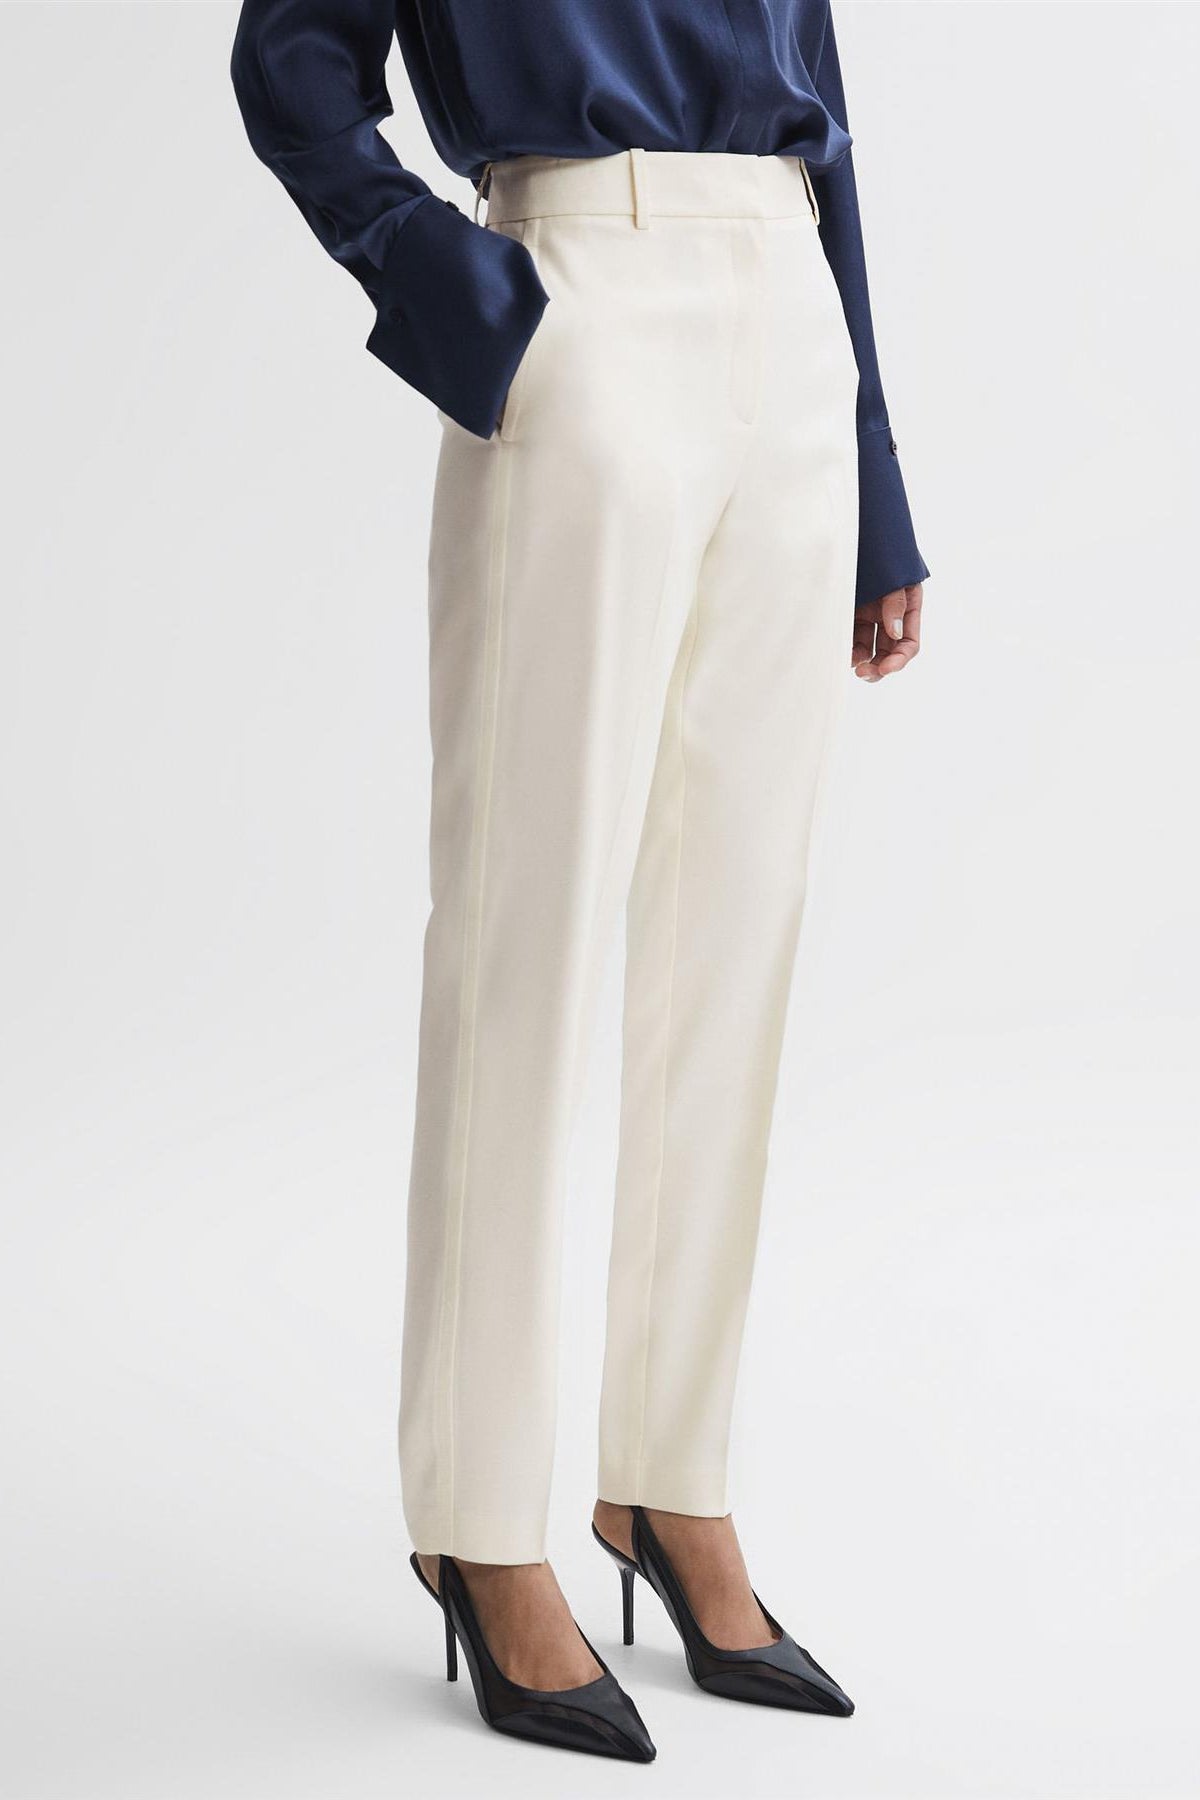 Ladies Trousers | Pull On Trousers, Elasticated Waist, Straight Leg Trousers  | Anna Rose